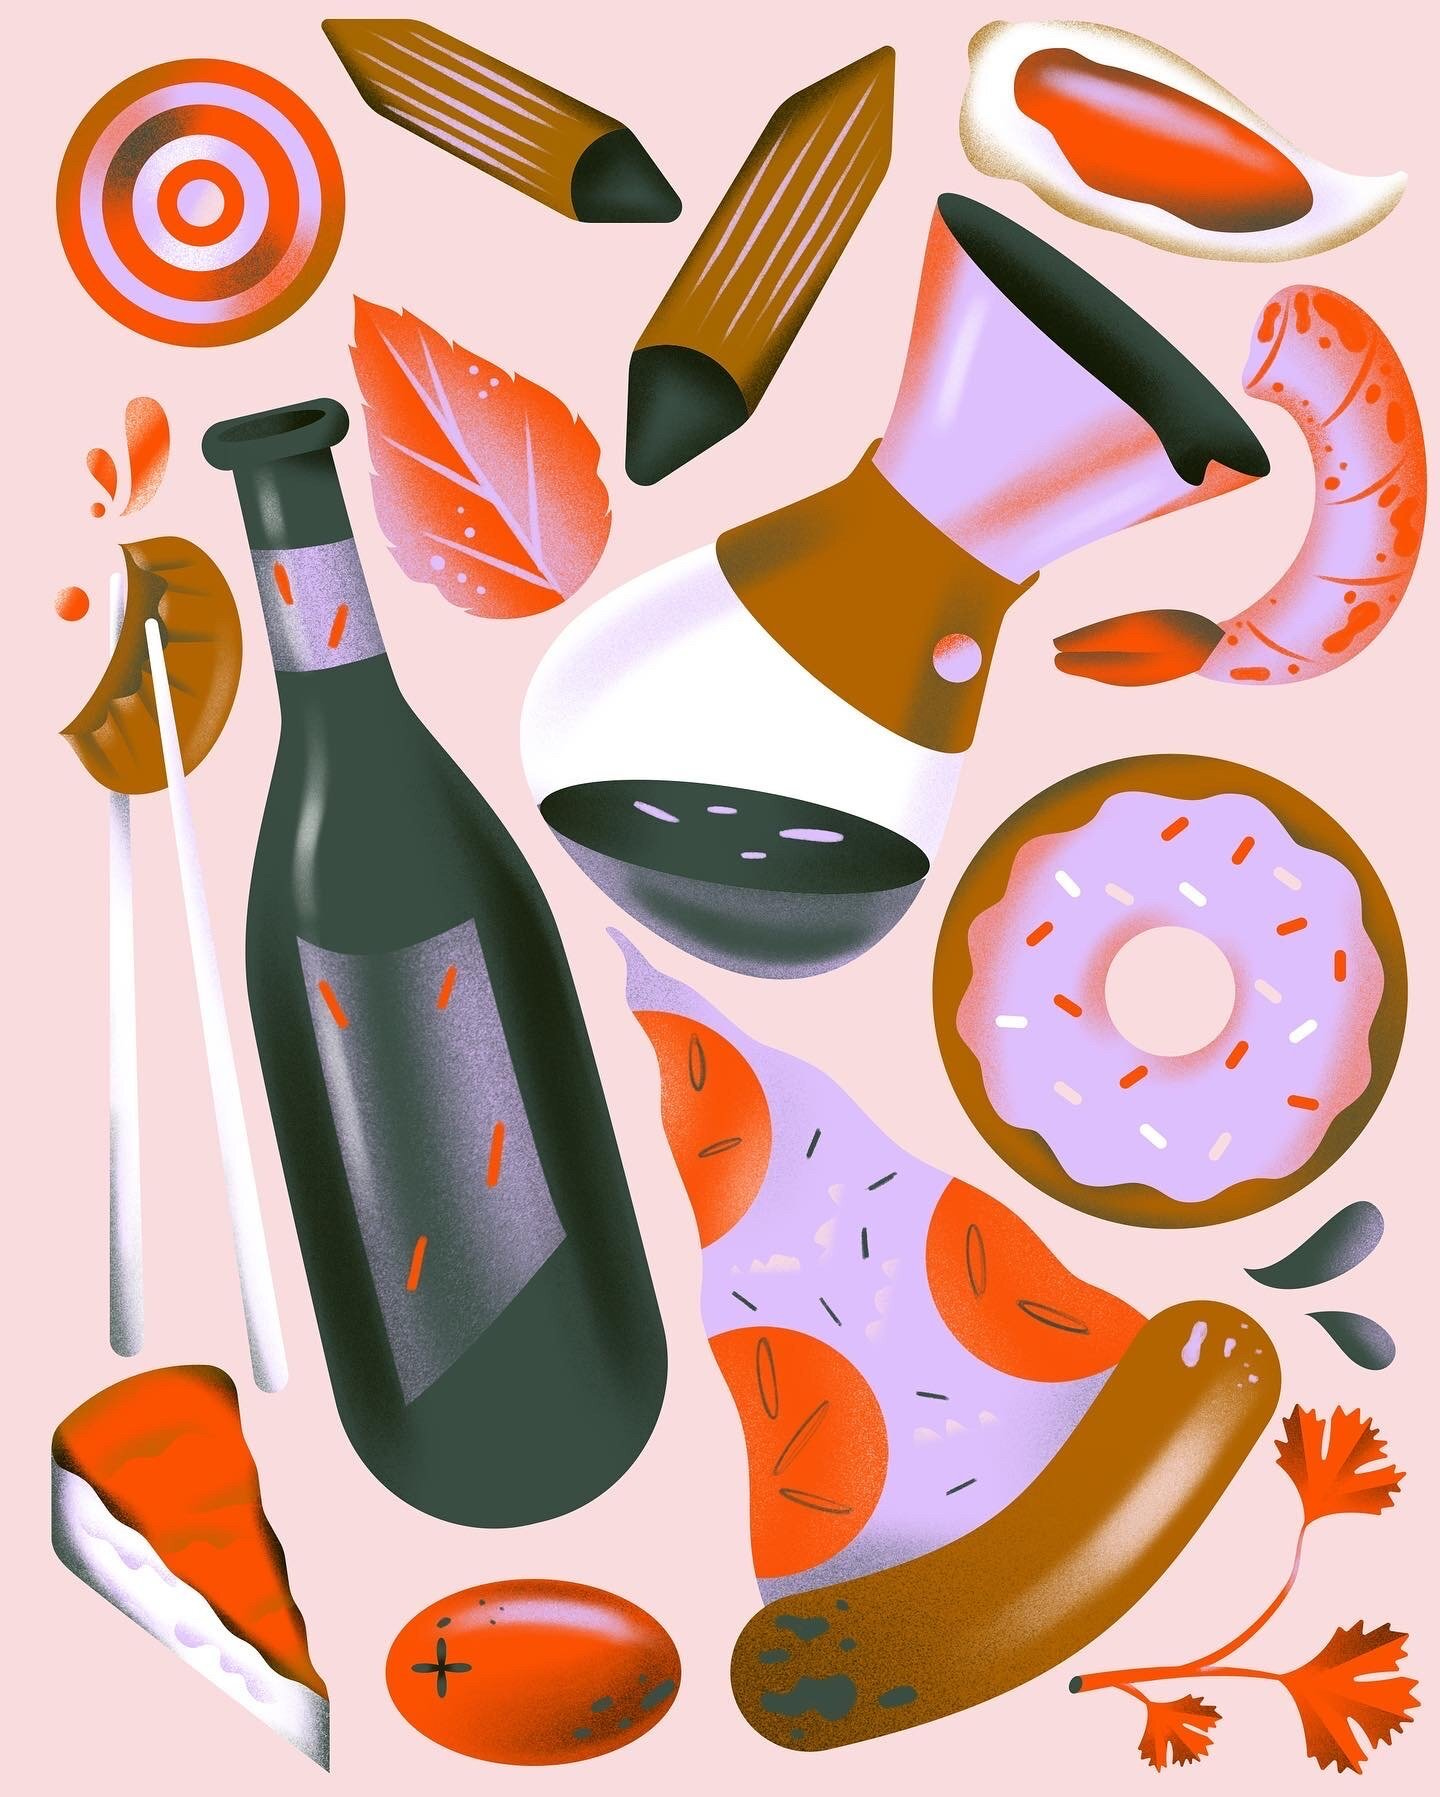 A colourful collection of objects, including a wine bottle, a target, a leaf, a set of chop sticks holding a dumpling, a donut, a slice of pizza, a shrimp, and a slice of pie.